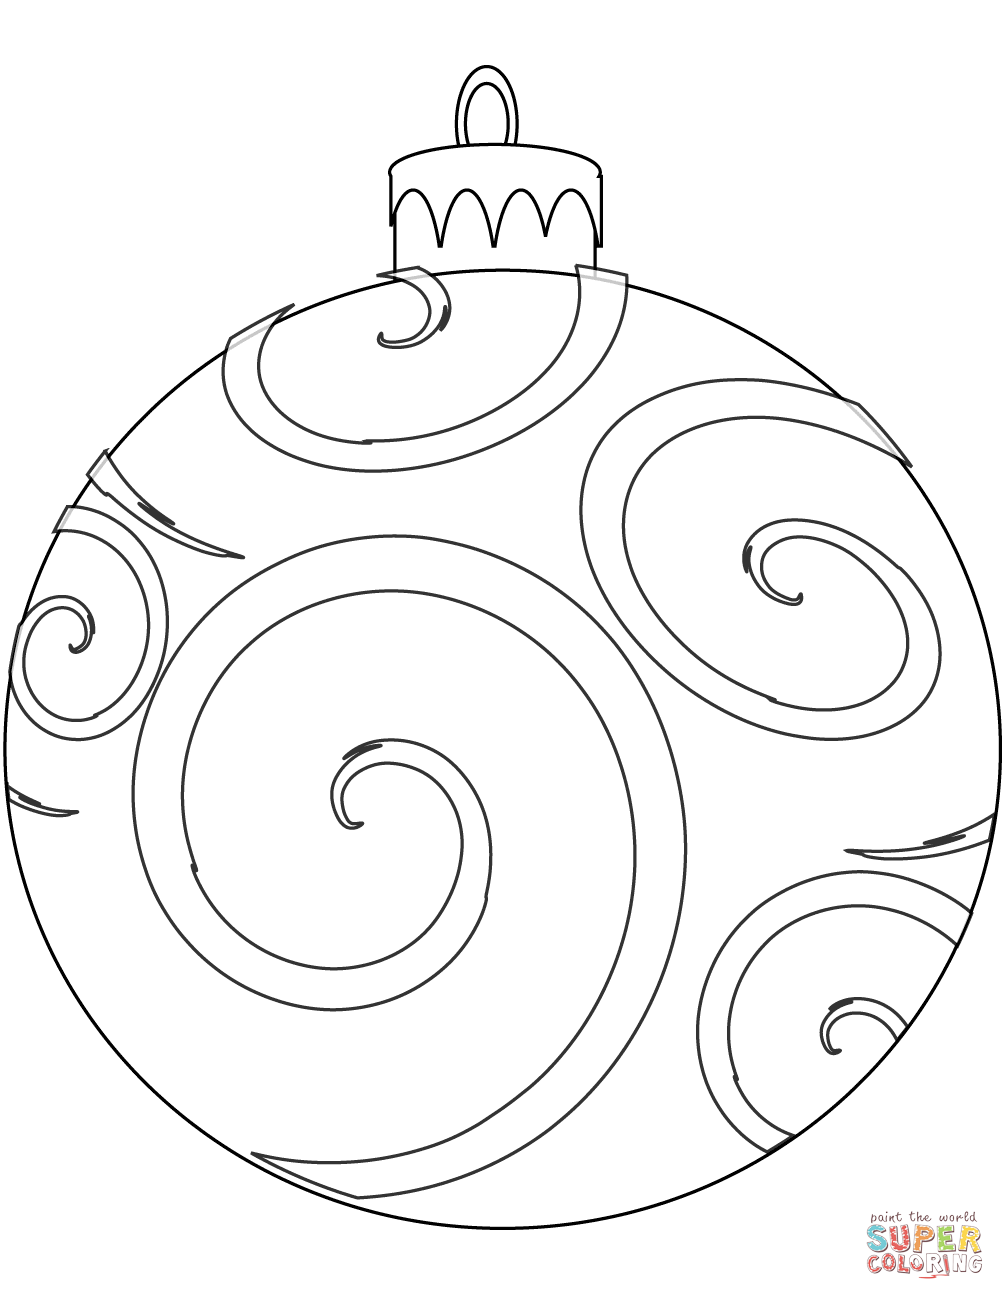 Free Printable Coloring Pages Of Christmas Ornaments At Coloring Page